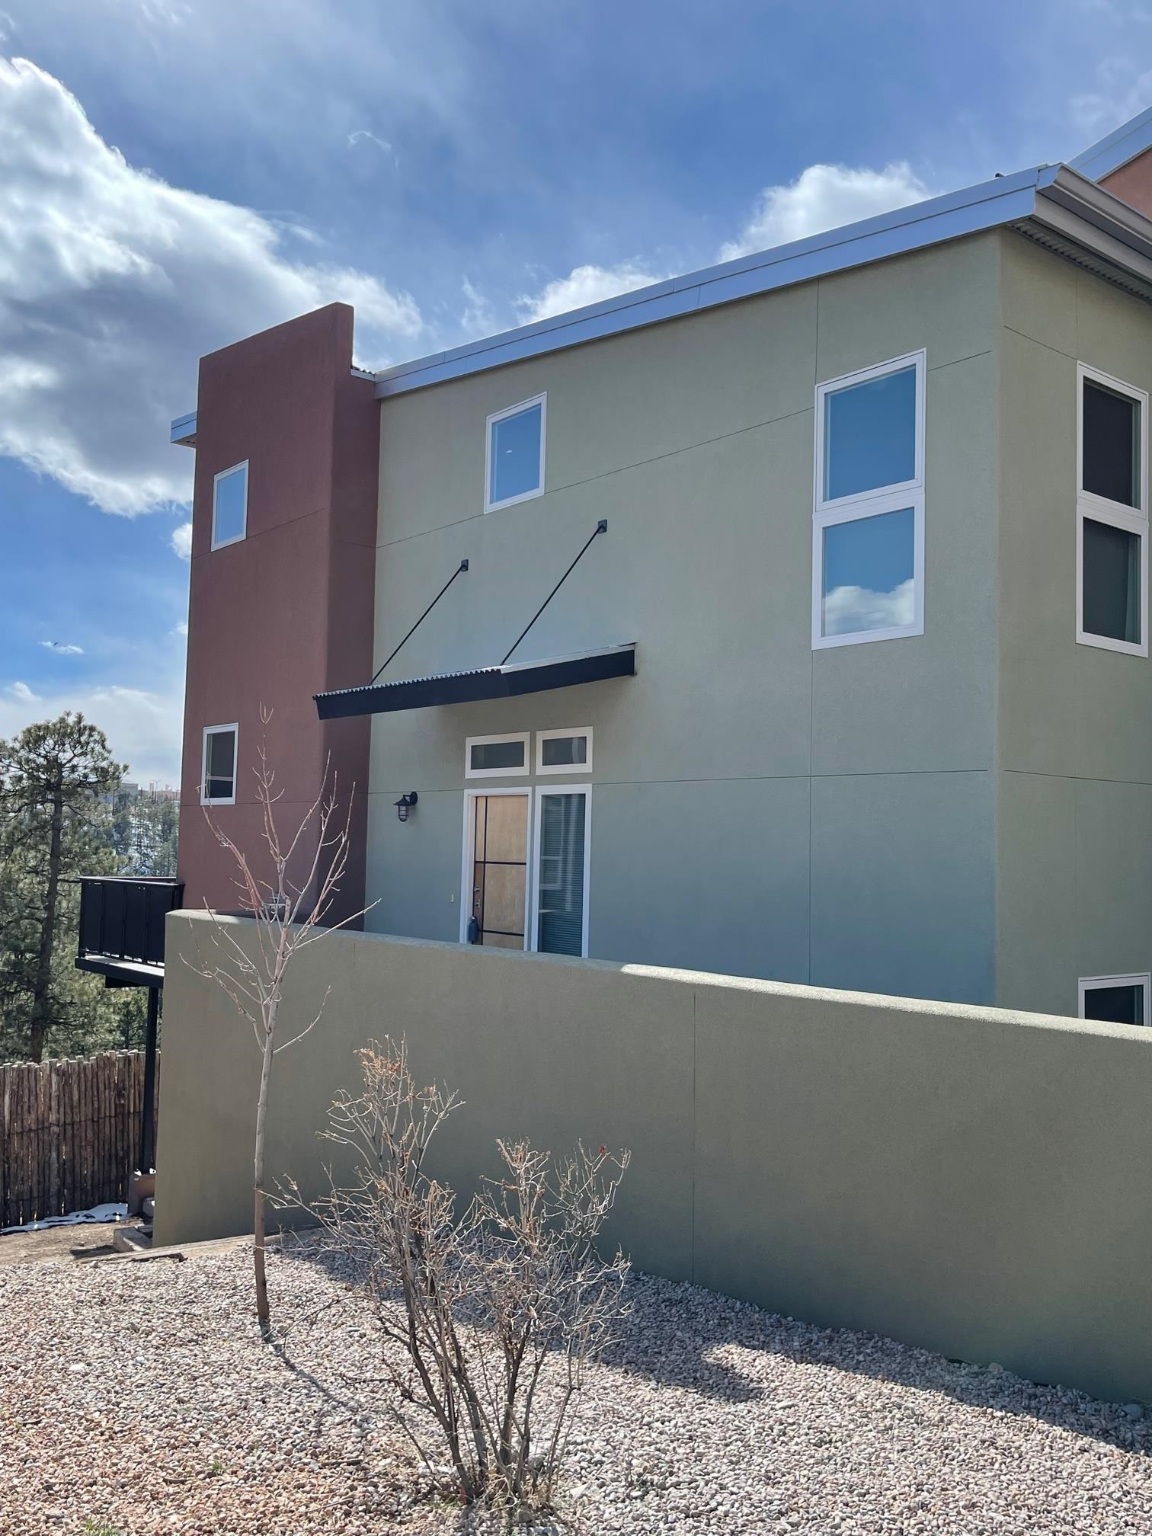 34 CANYON VIEW, Los Alamos, New Mexico 87544, 4 Bedrooms Bedrooms, ,4 BathroomsBathrooms,Residential,For Sale,34 CANYON VIEW,202200726